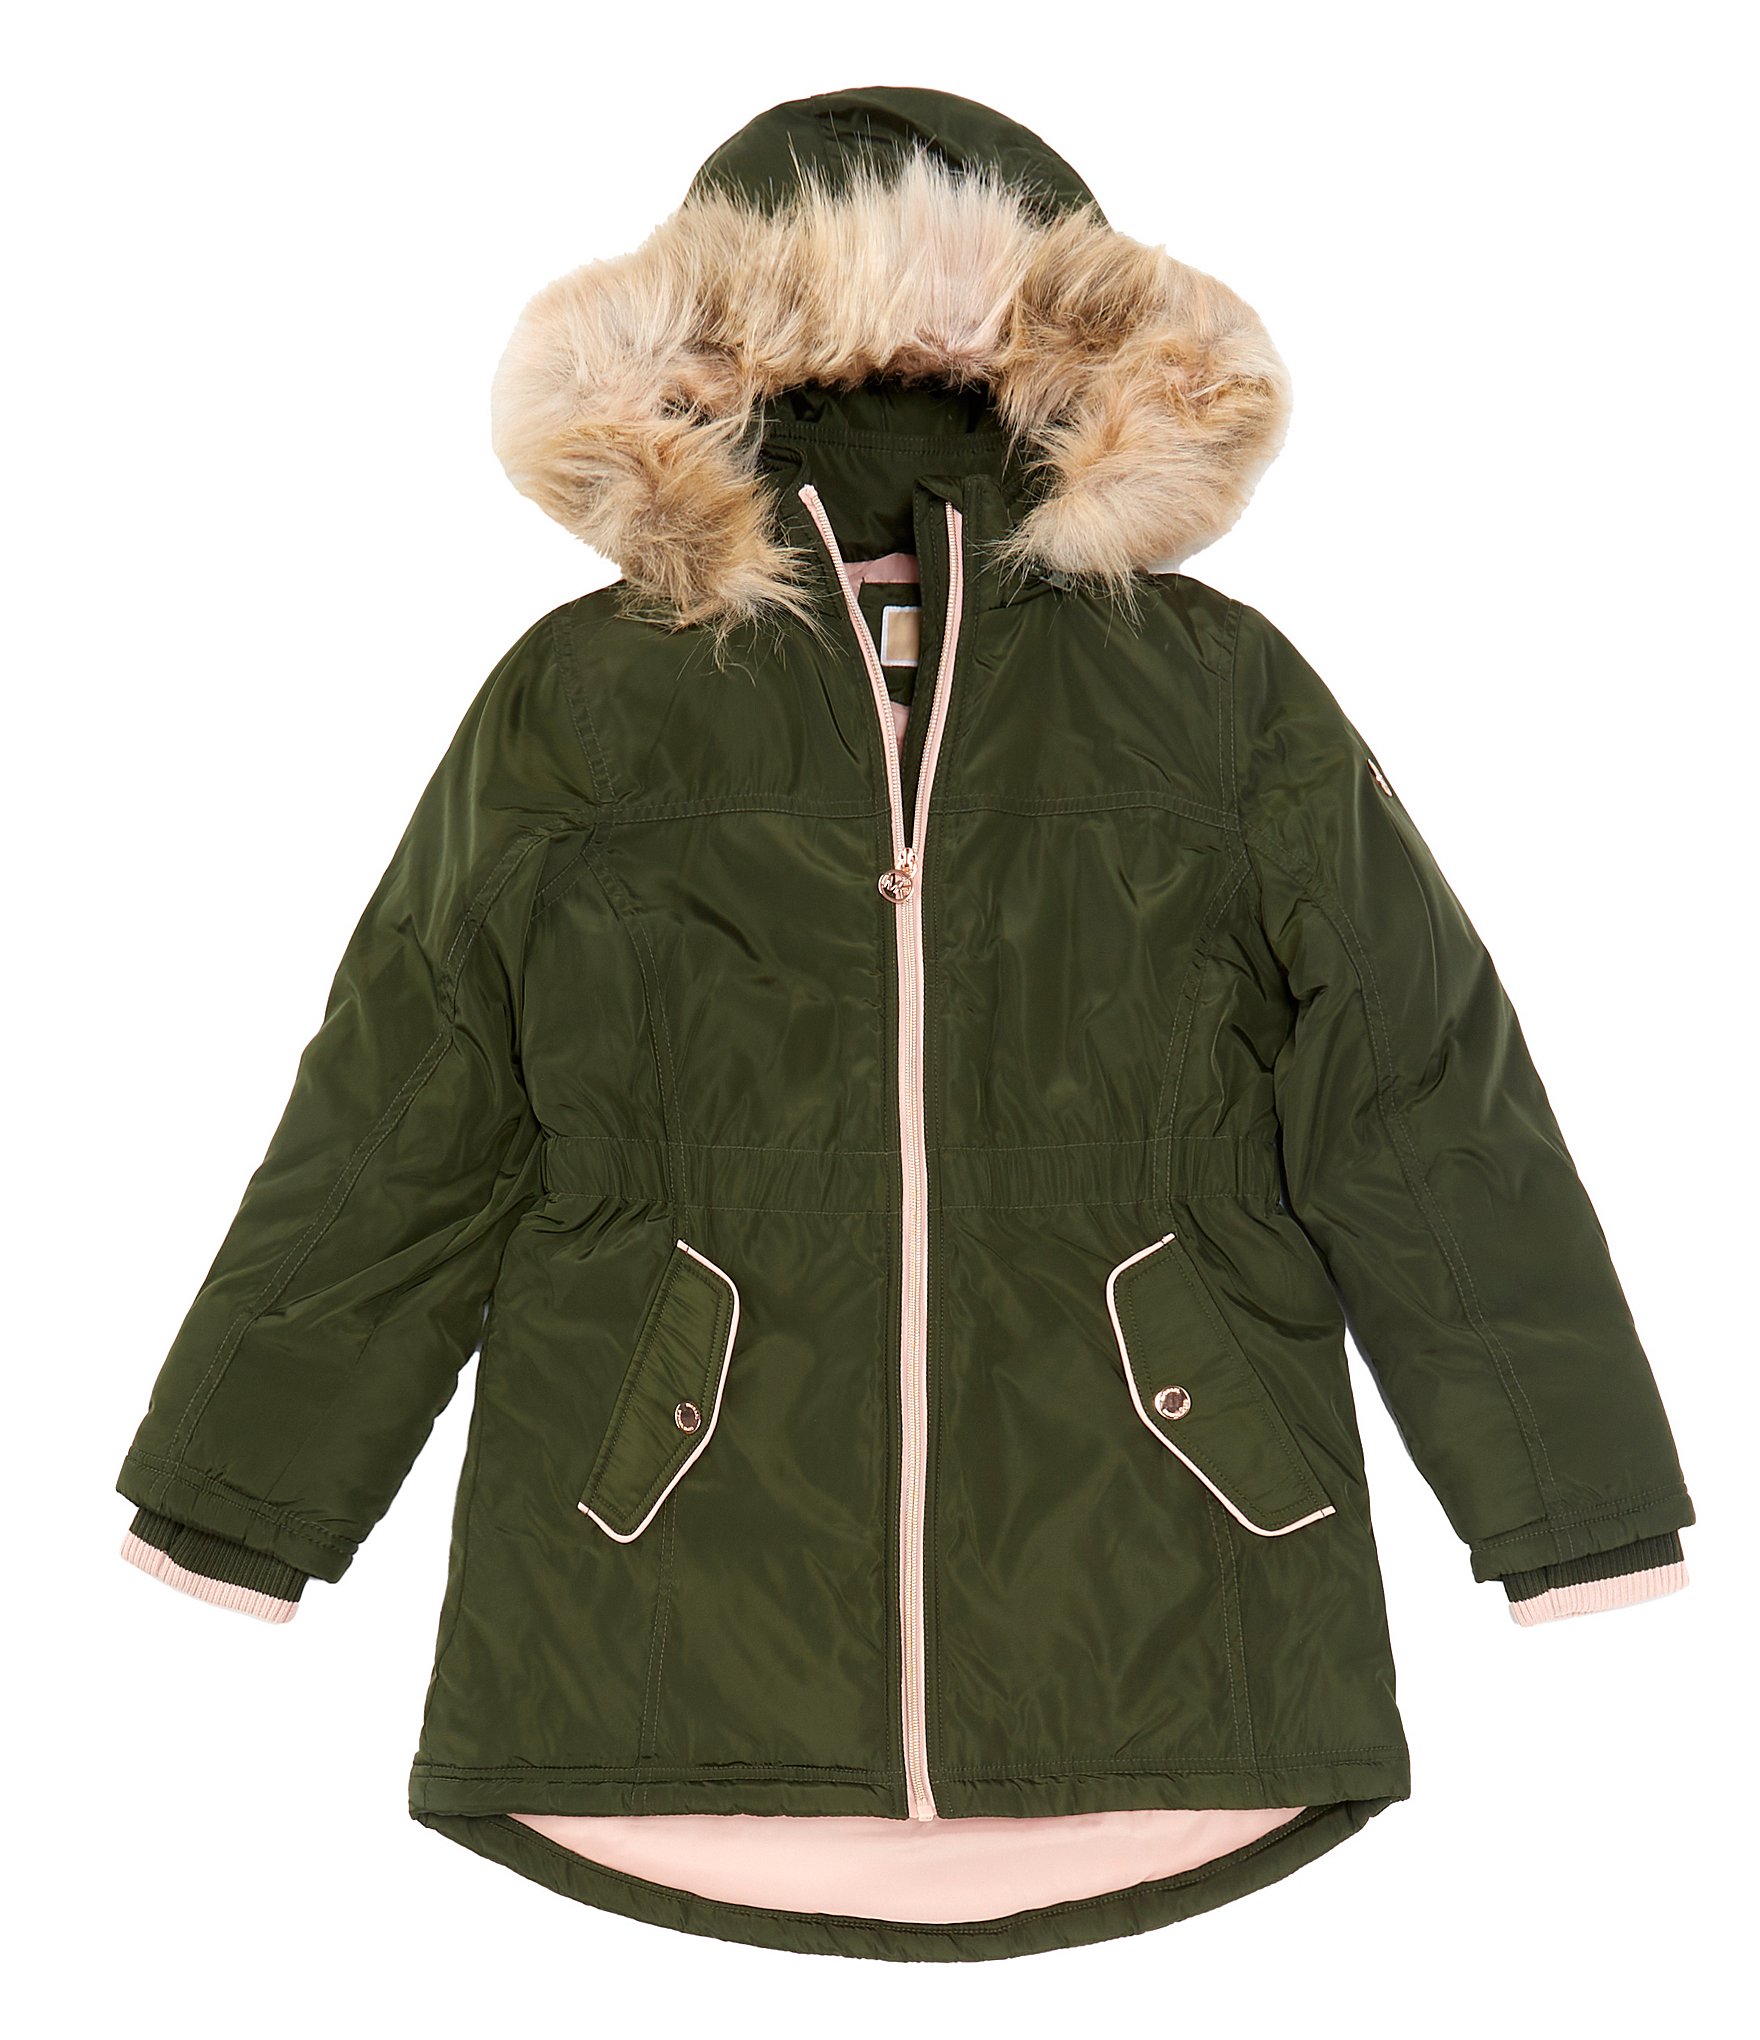 Michael Kors Big Girls 7-16 Heavy Weight Parka With Faux Fur Hood ...